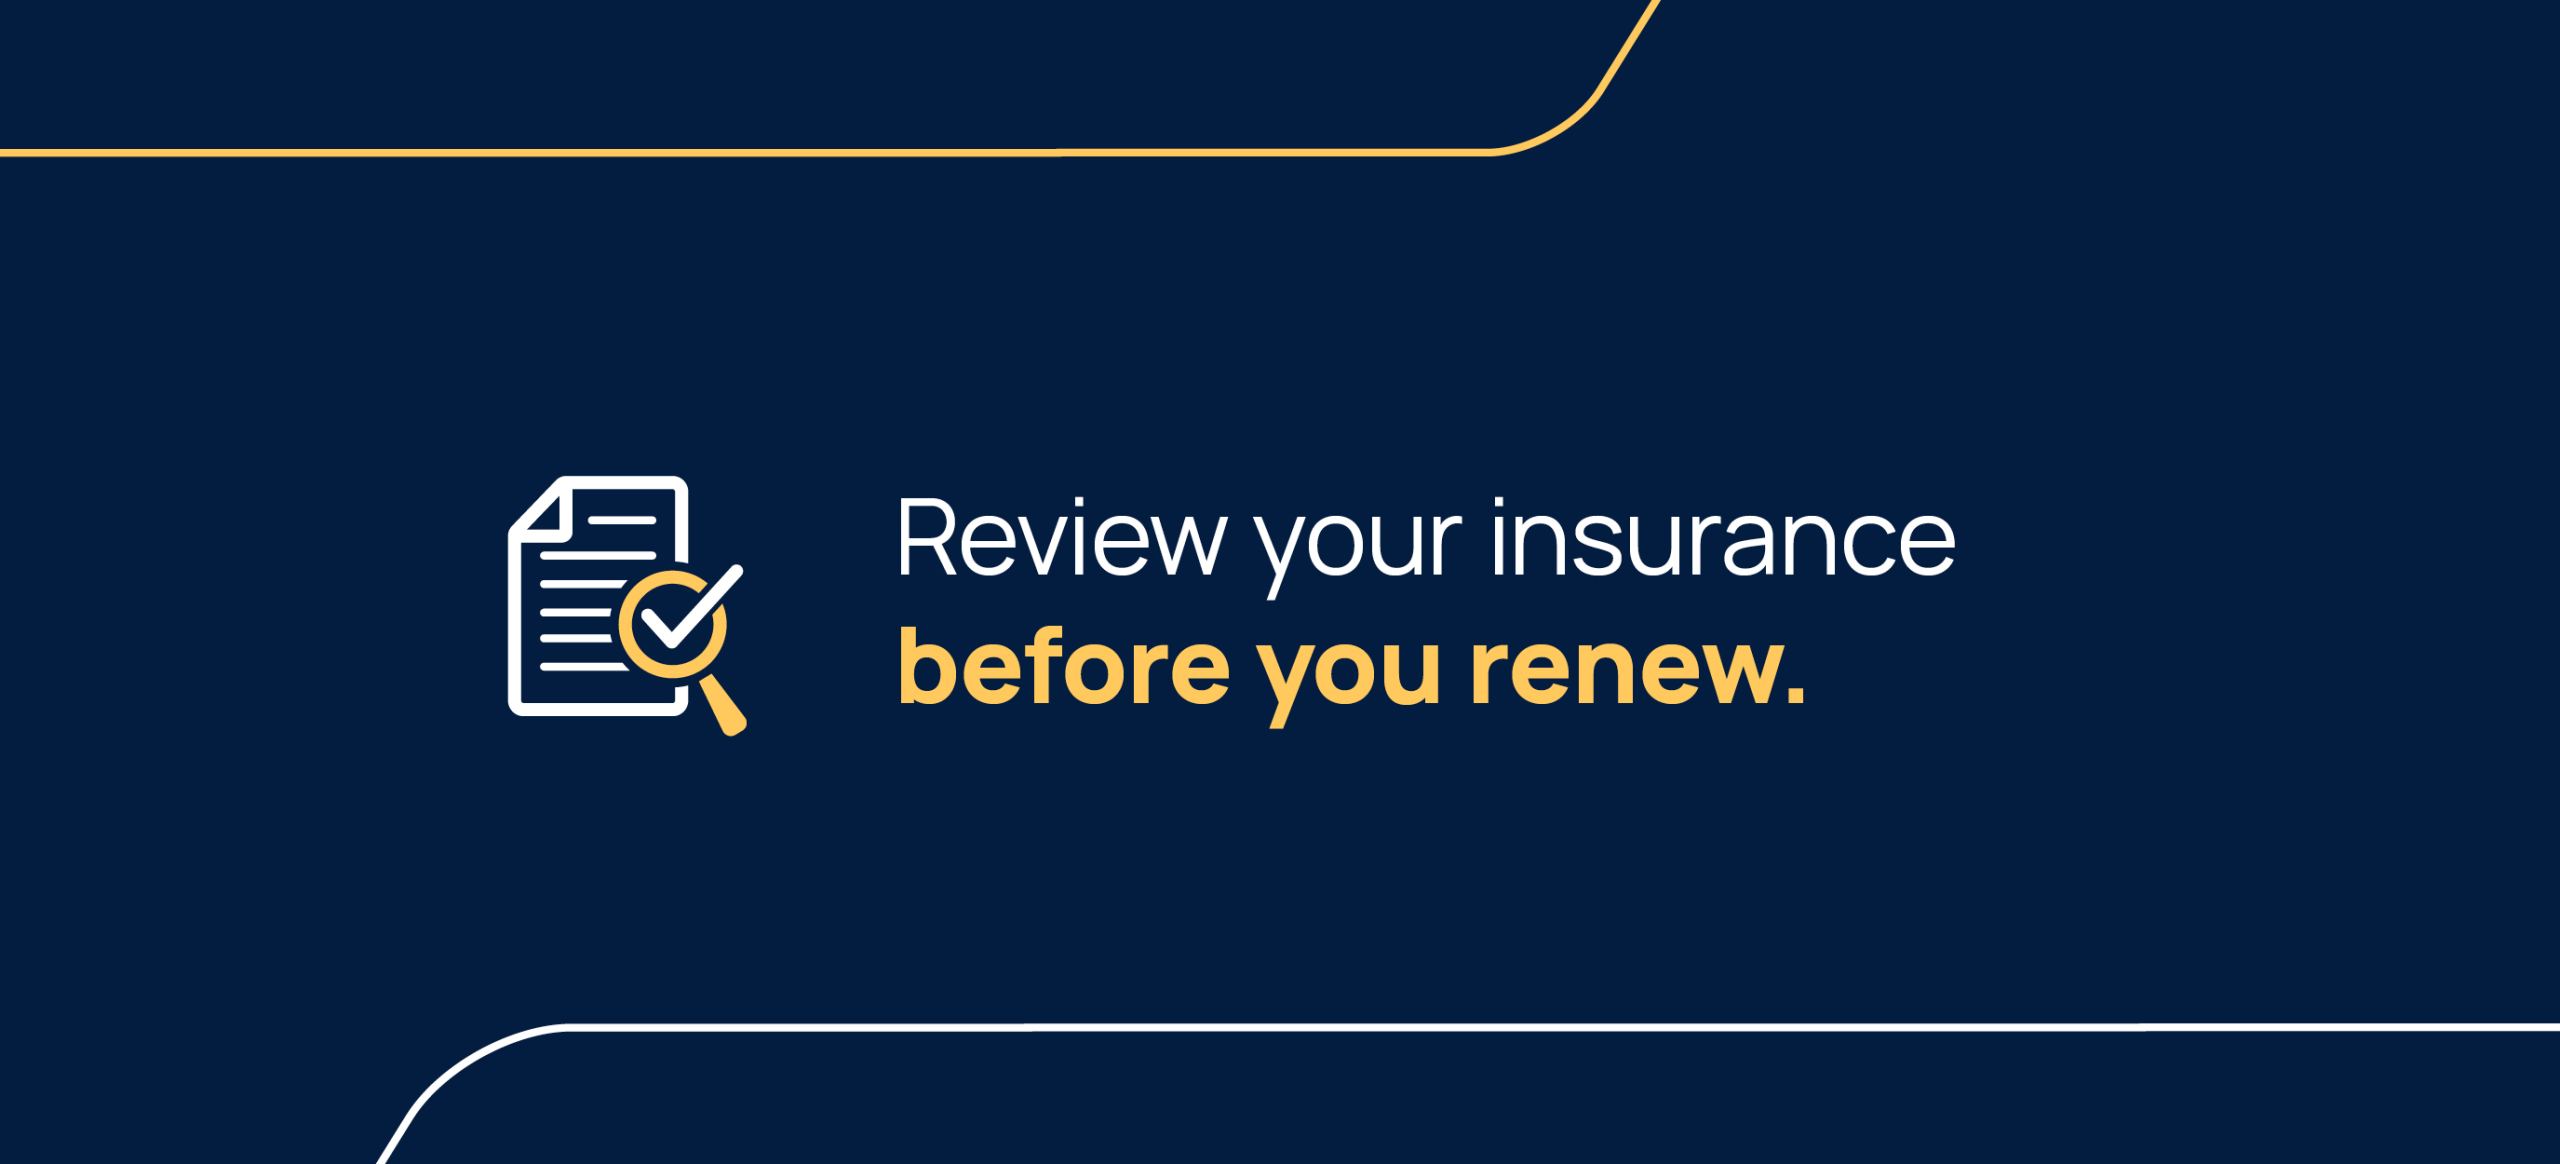 Review before you renew.